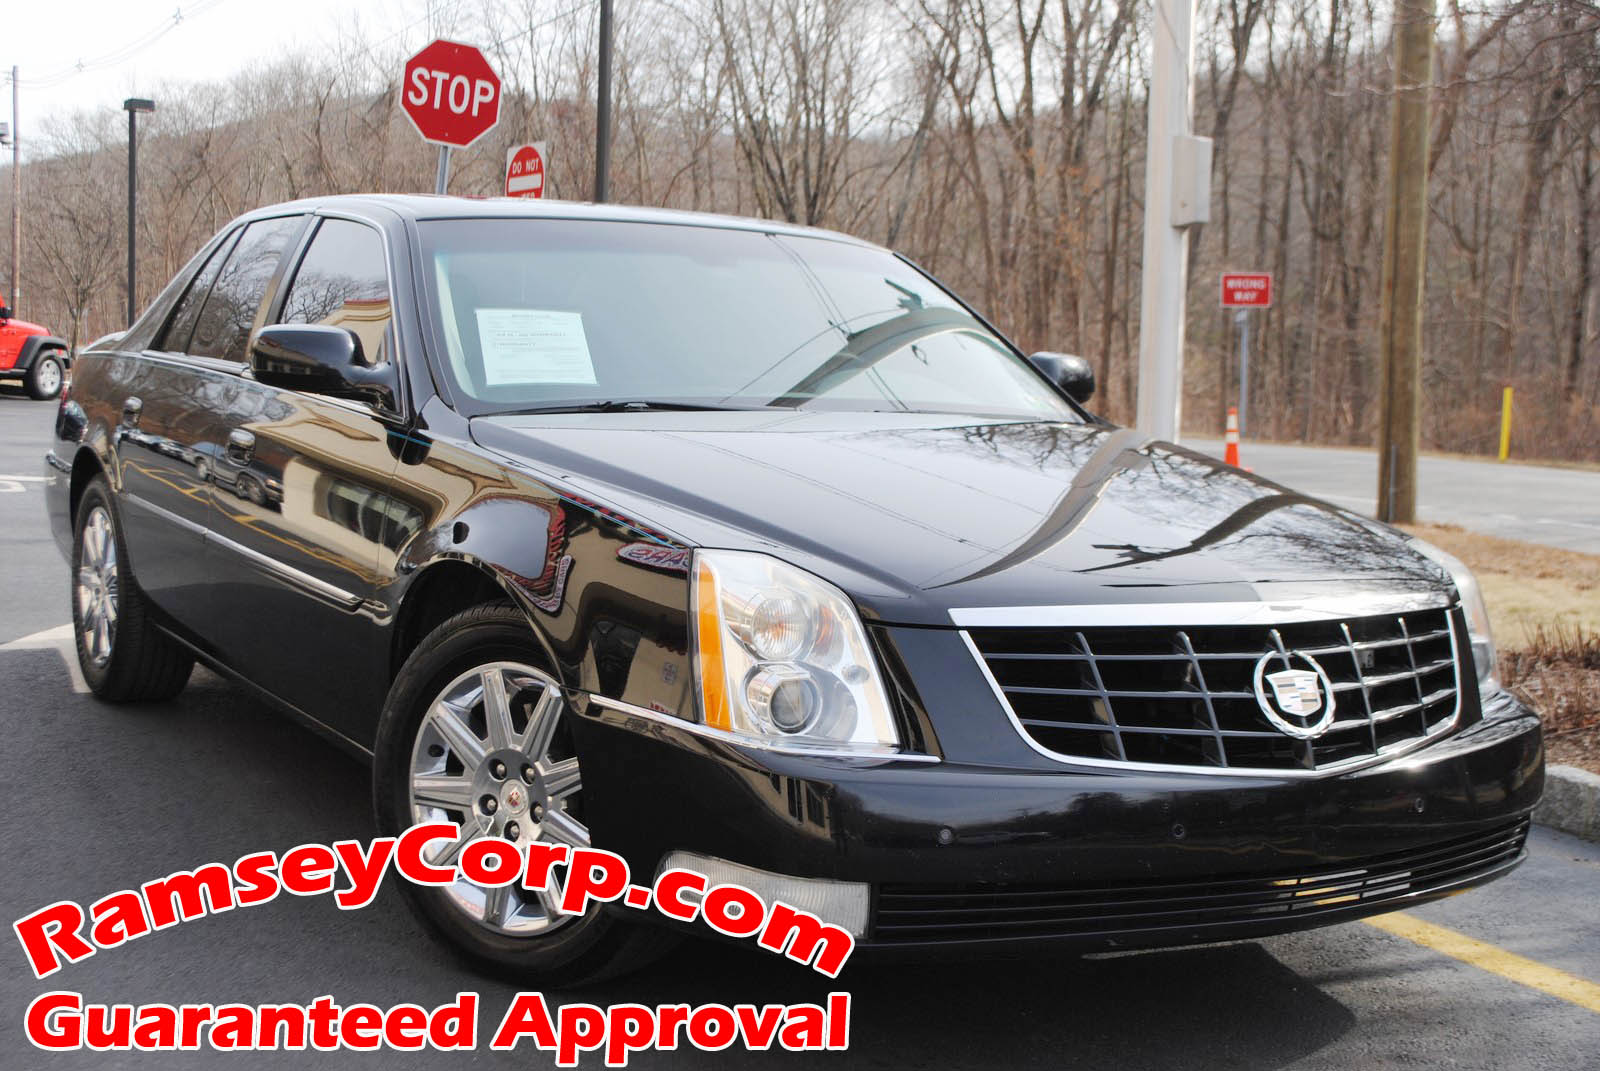 Used 2011 CADILLAC DTS For Sale at Ramsey Corp. | VIN: 1G6KH5E64BU118577